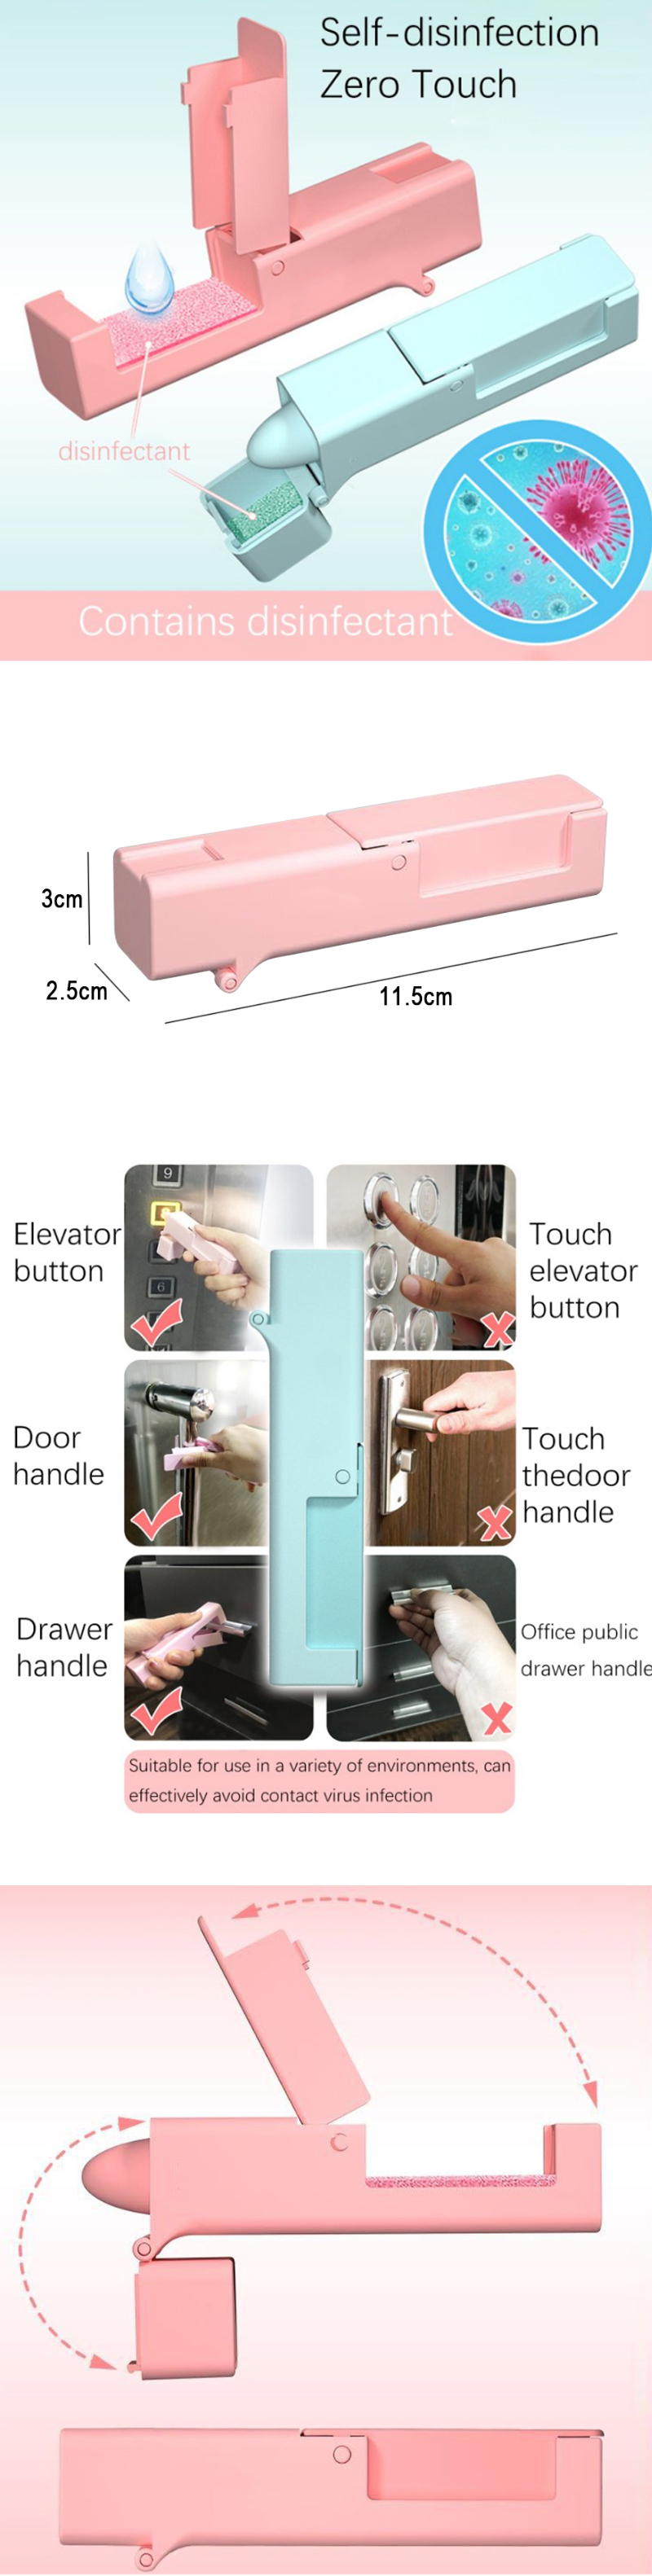 Portable-Isolation-Tool-Travel-Disinfection-Security-Avoid-Touching-Door-Pulls-Clip-Public-Elevator--1644826-1